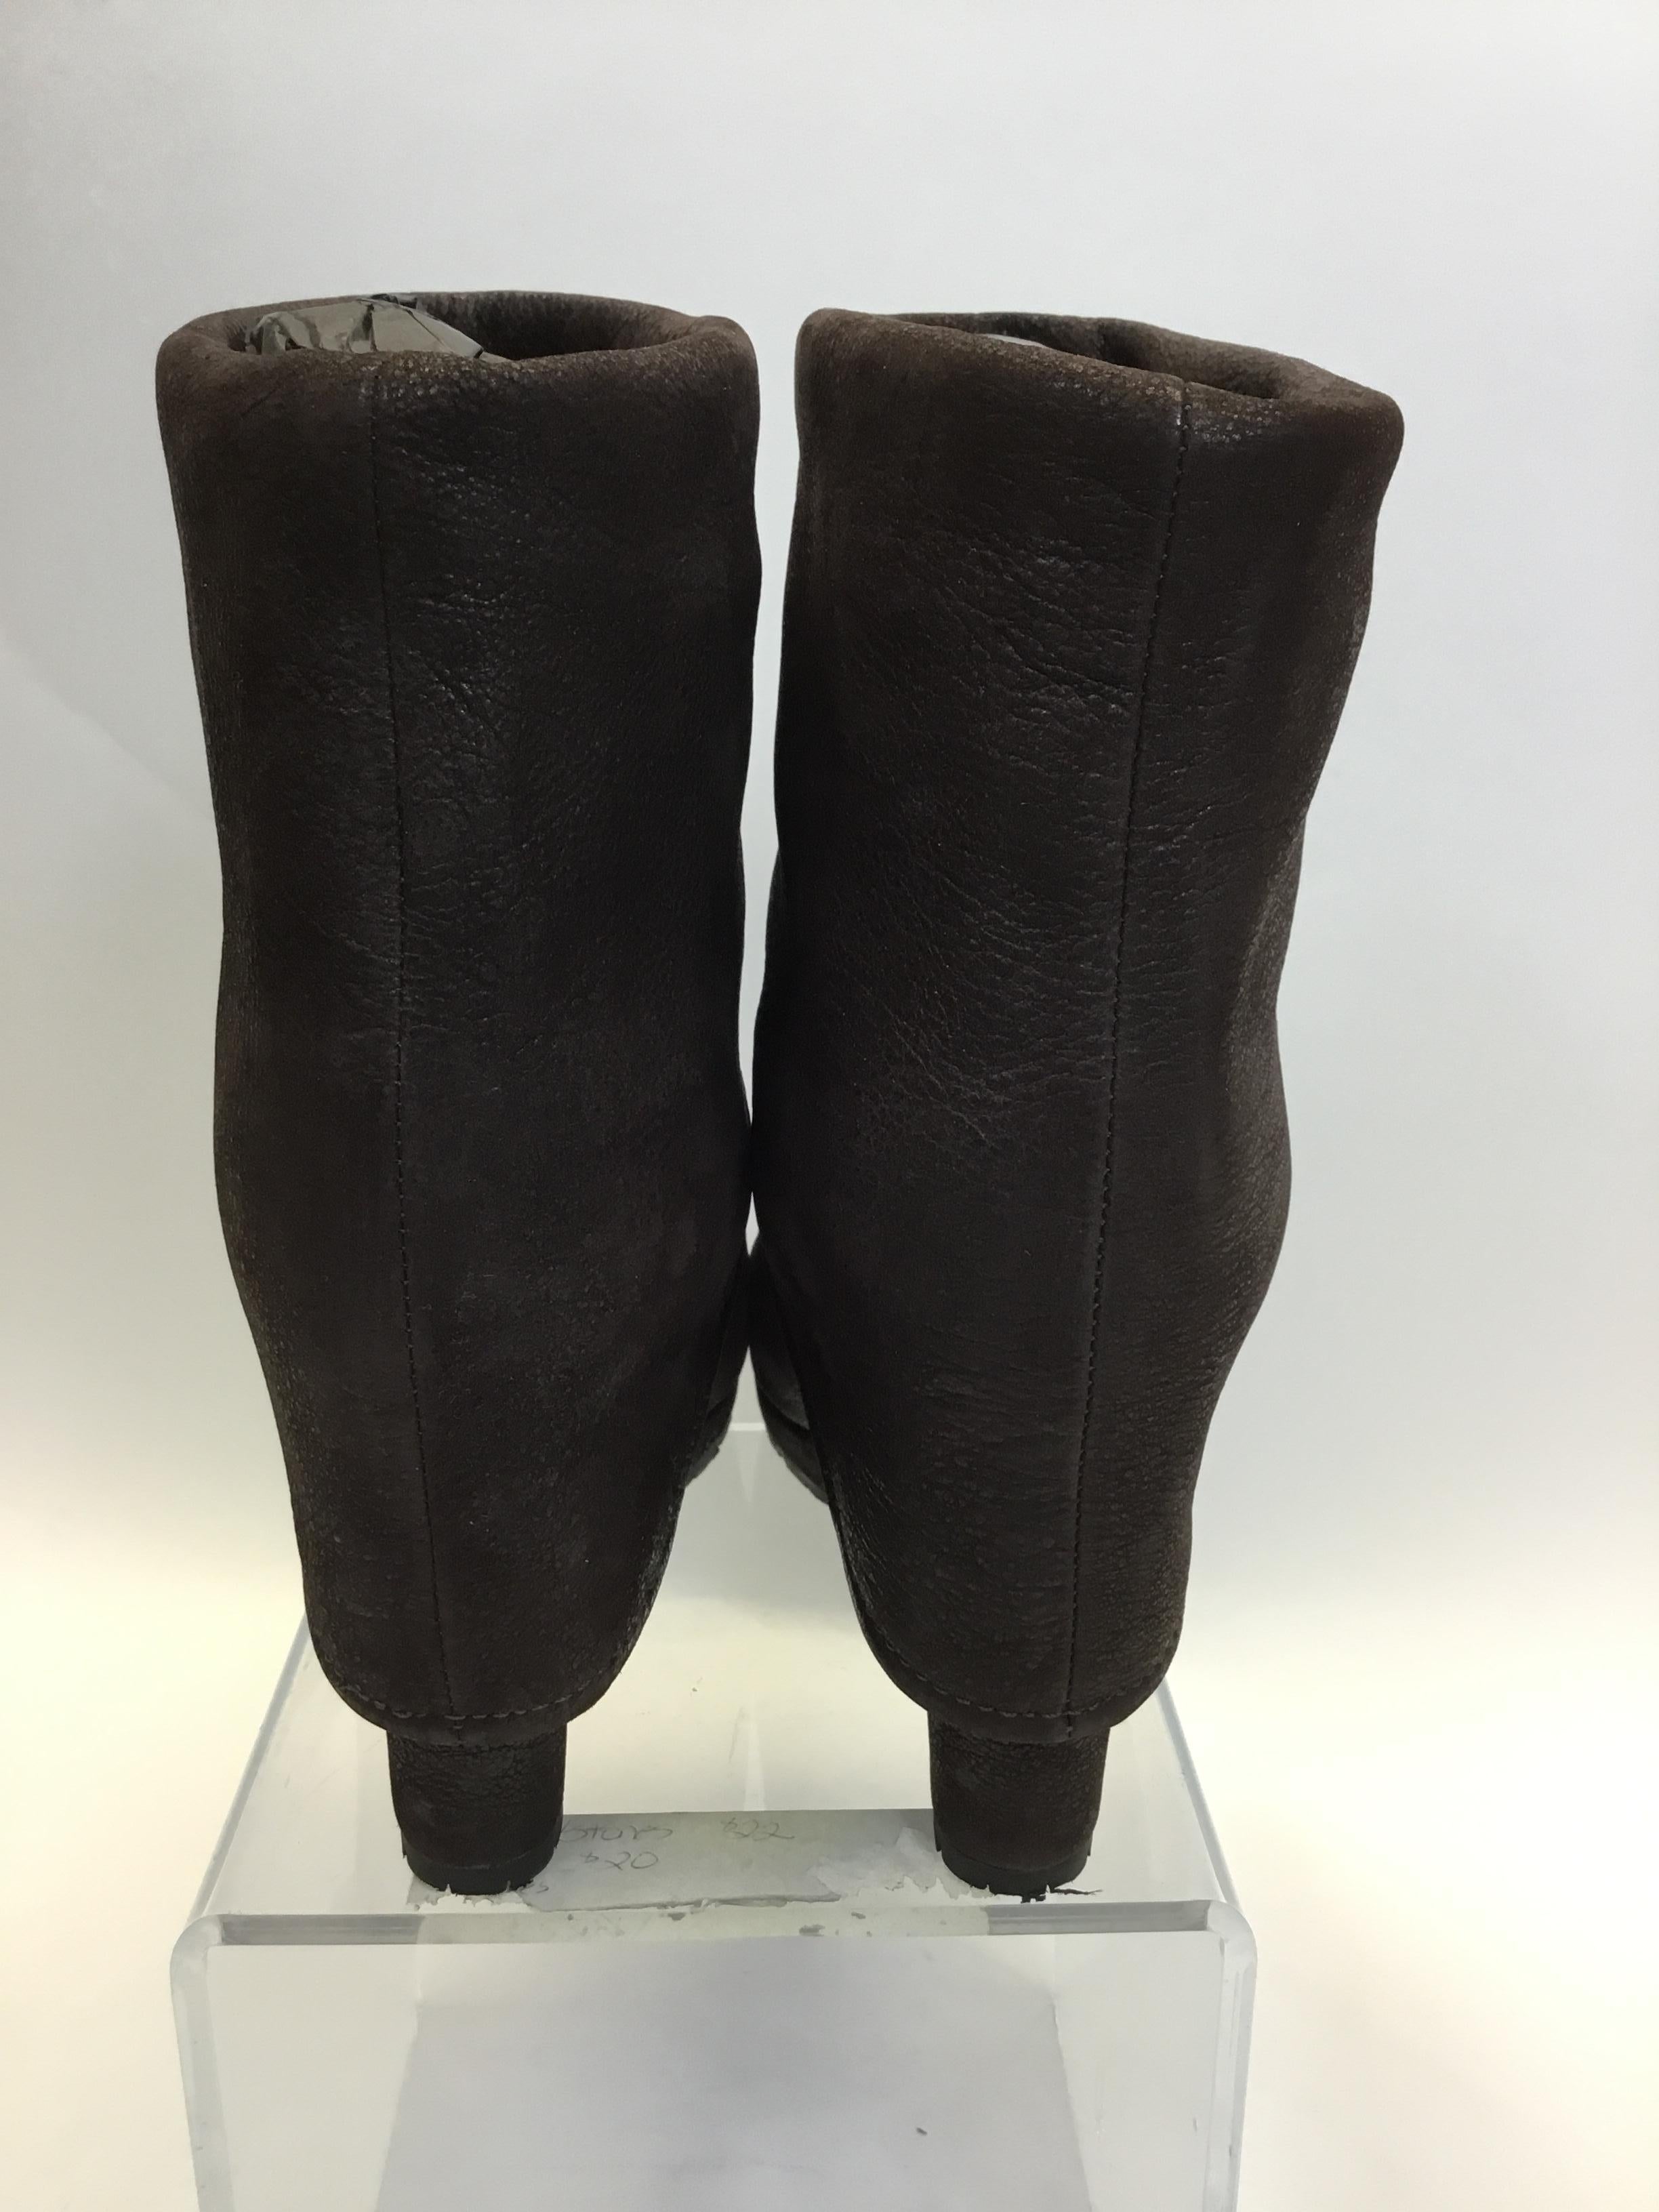 Prada Brown Leather Wedge Bootie In Good Condition For Sale In Narberth, PA